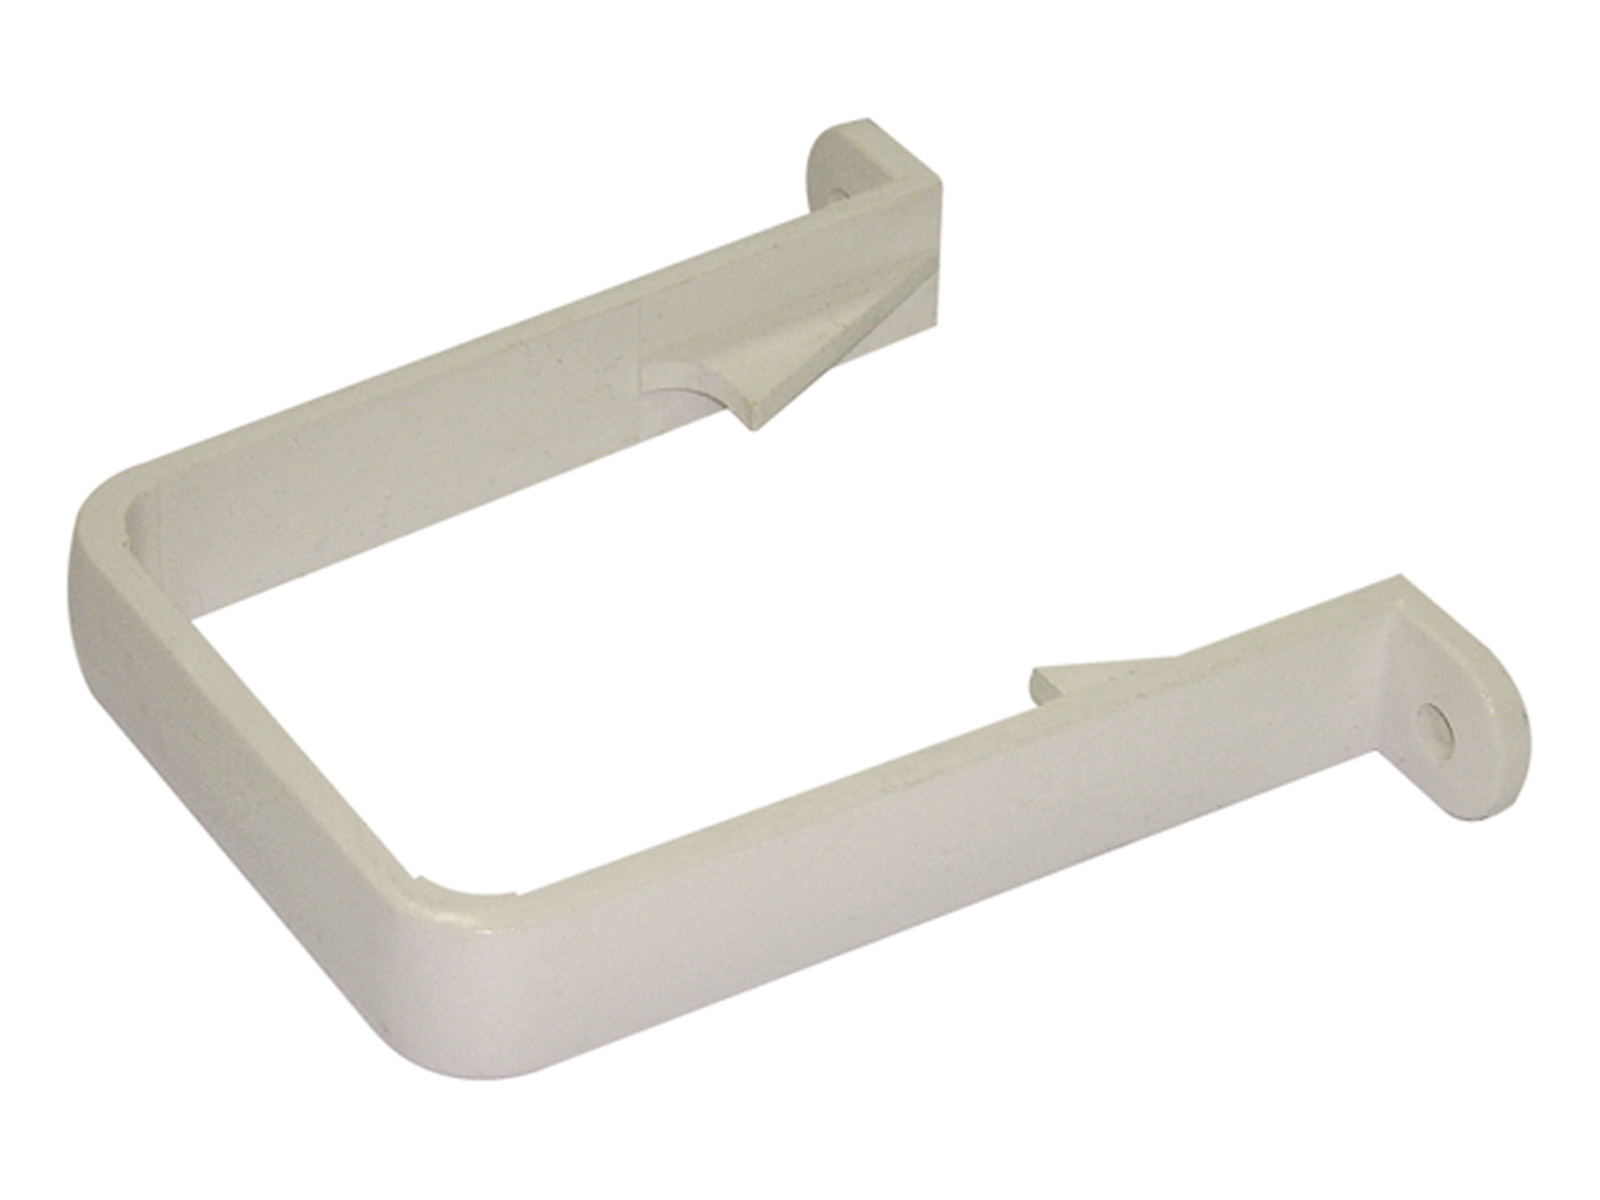 Floplast RCS1WH 65mm Square Downpipe - Pipe Clip - White